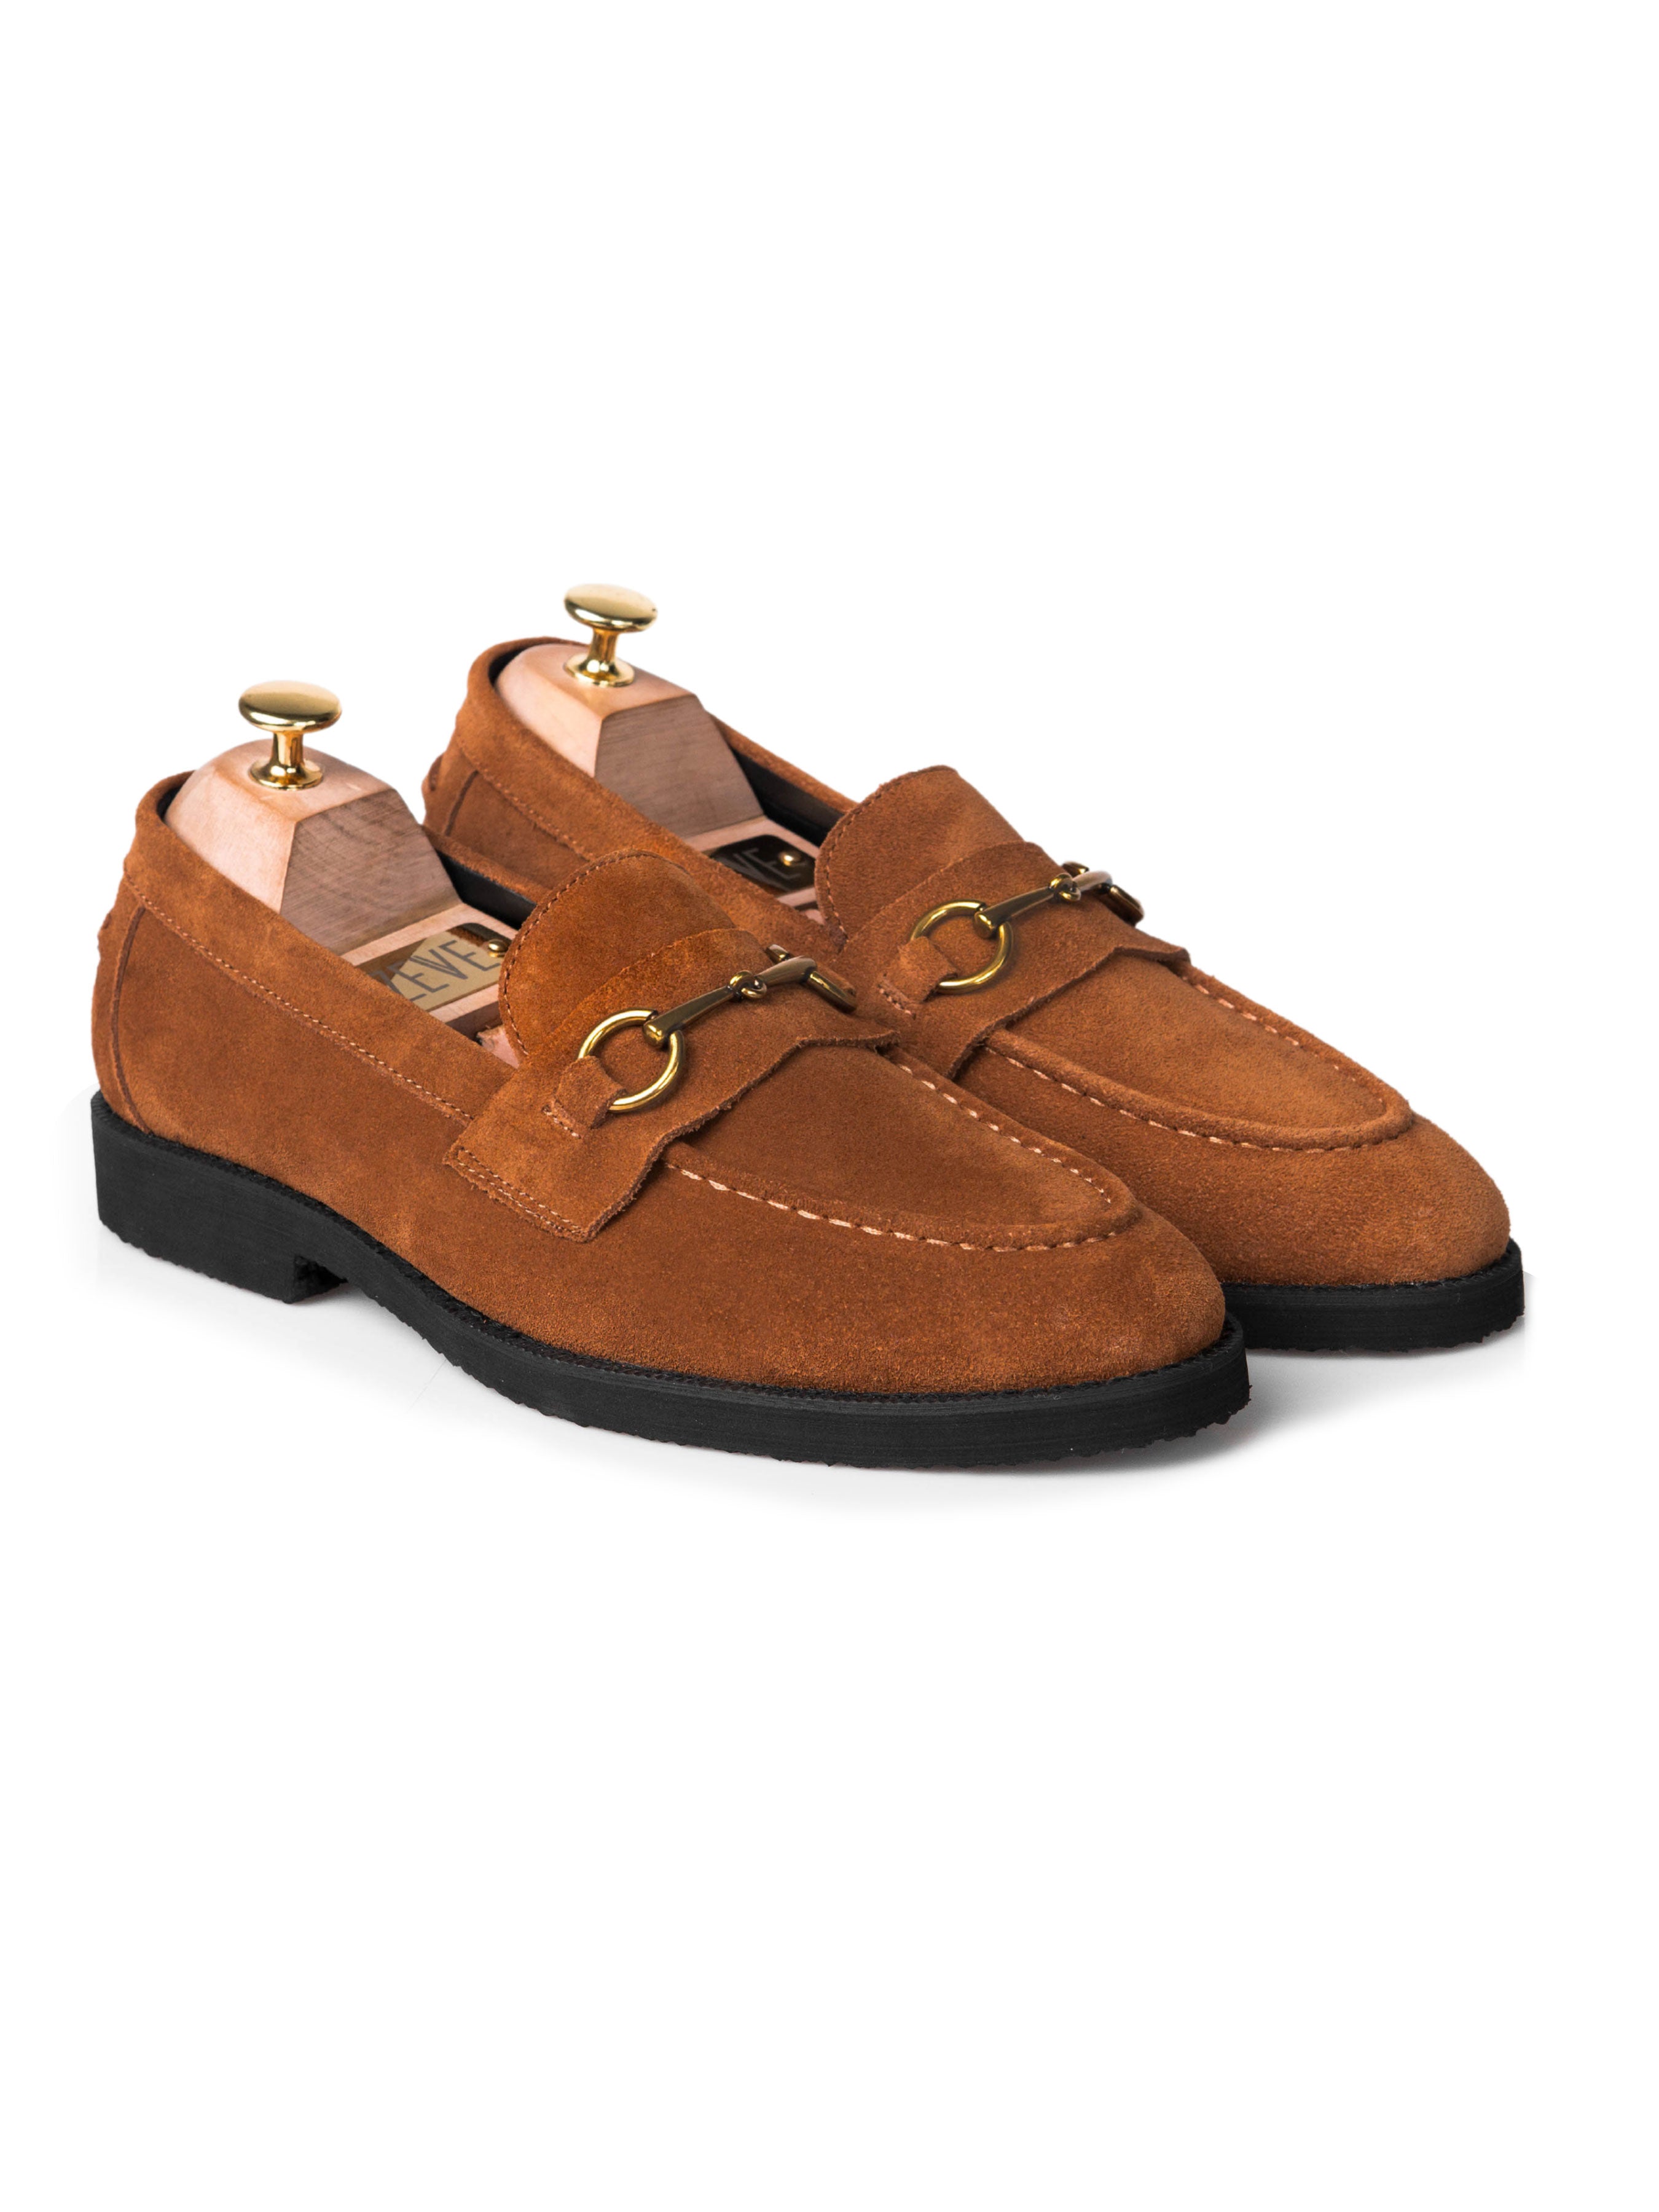 Penny Loafer Horsebit Buckle - Brown Suede Leather (Crepe Sole) - Zeve Shoes